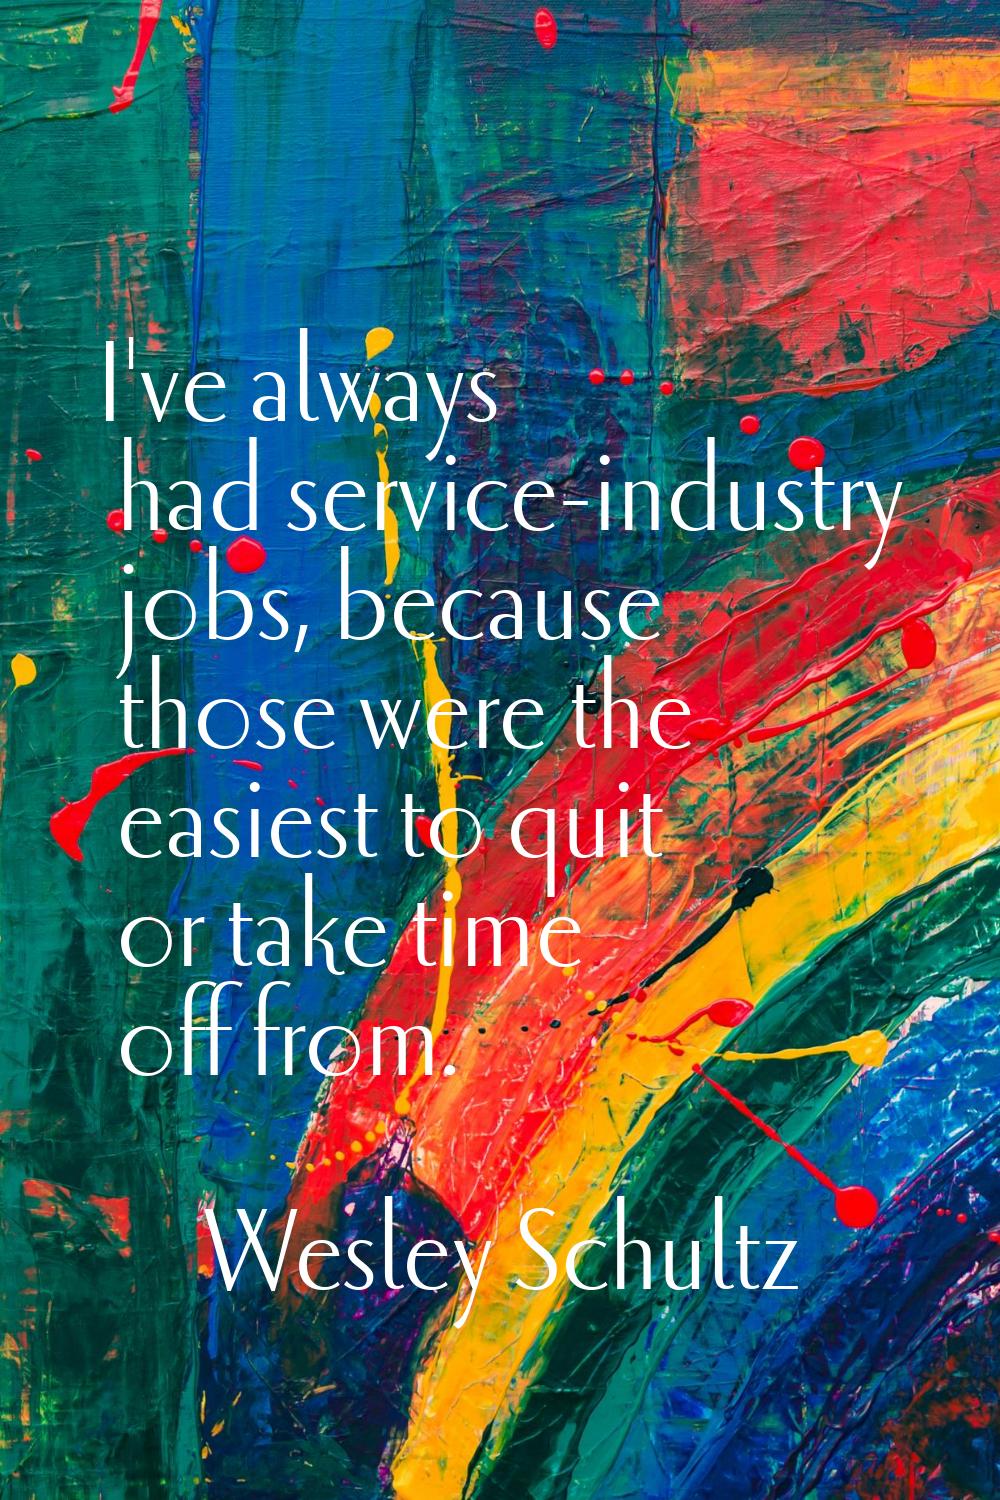 I've always had service-industry jobs, because those were the easiest to quit or take time off from